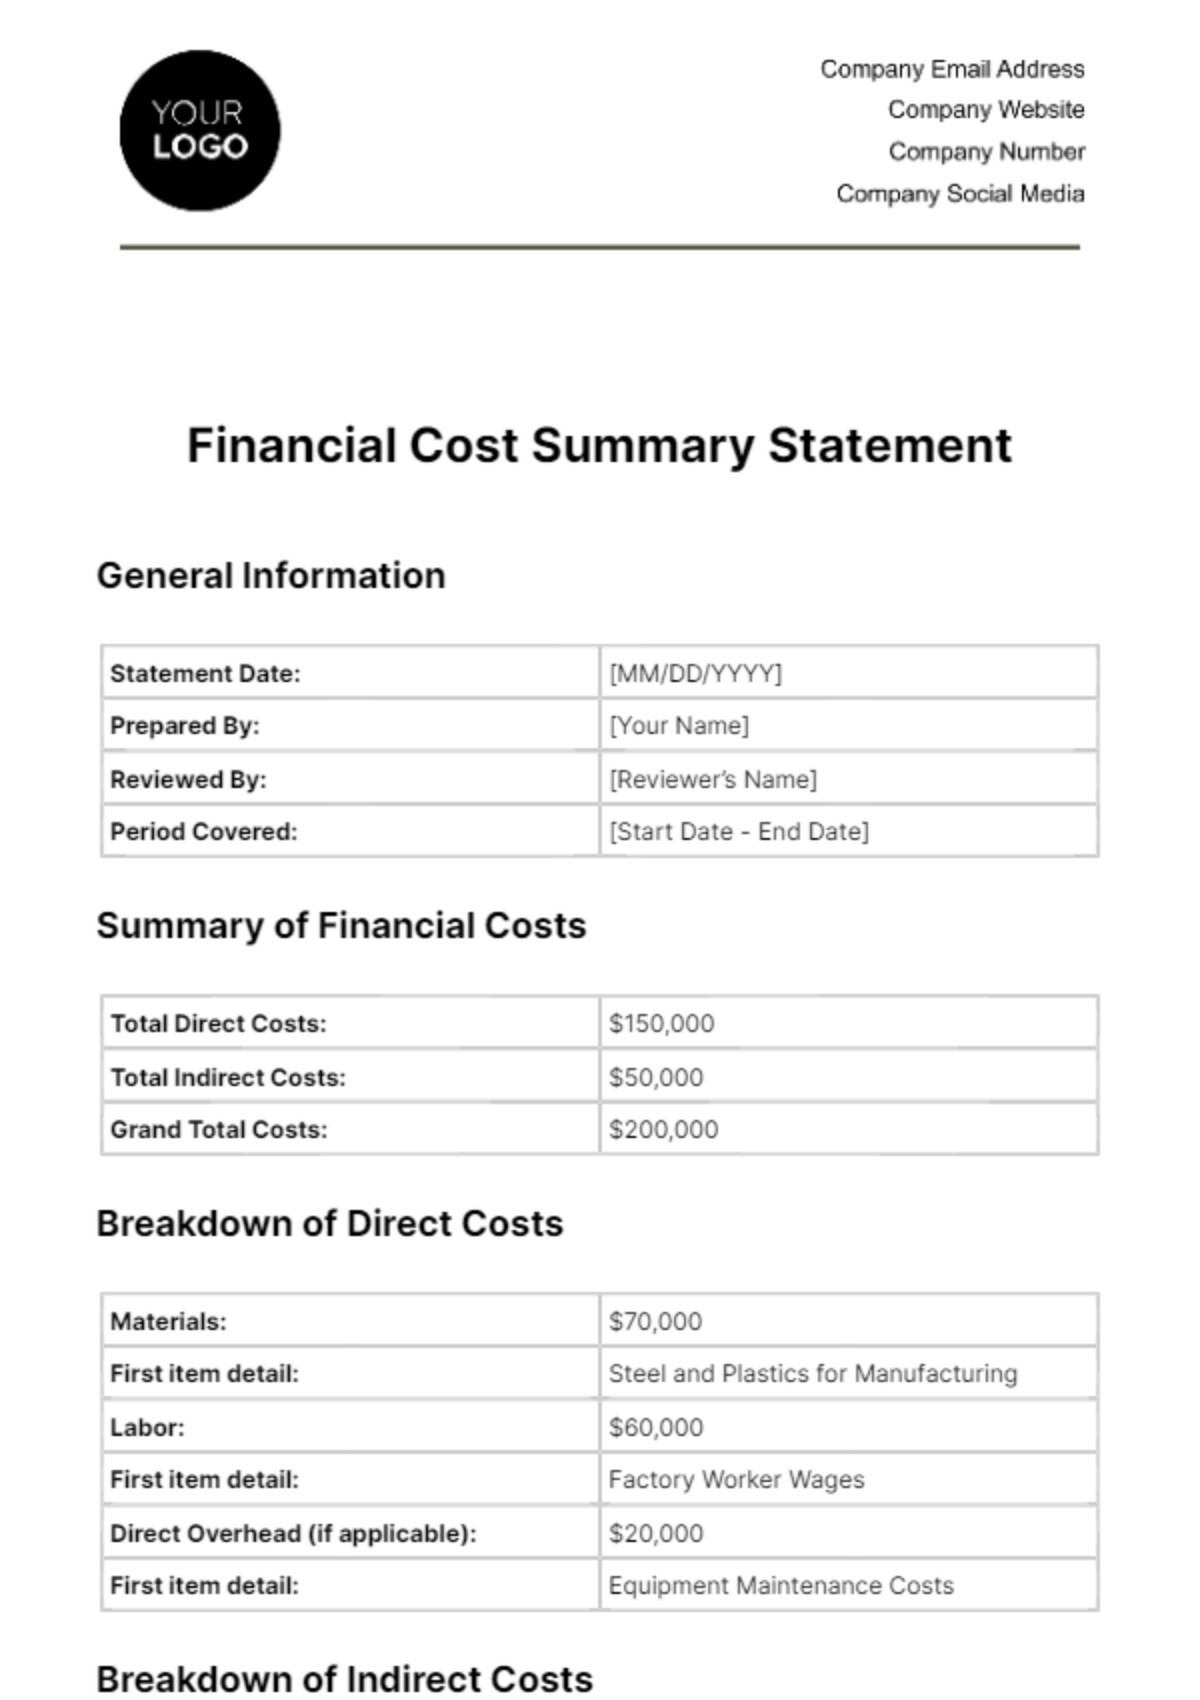 Financial Cost Summary Statement Template